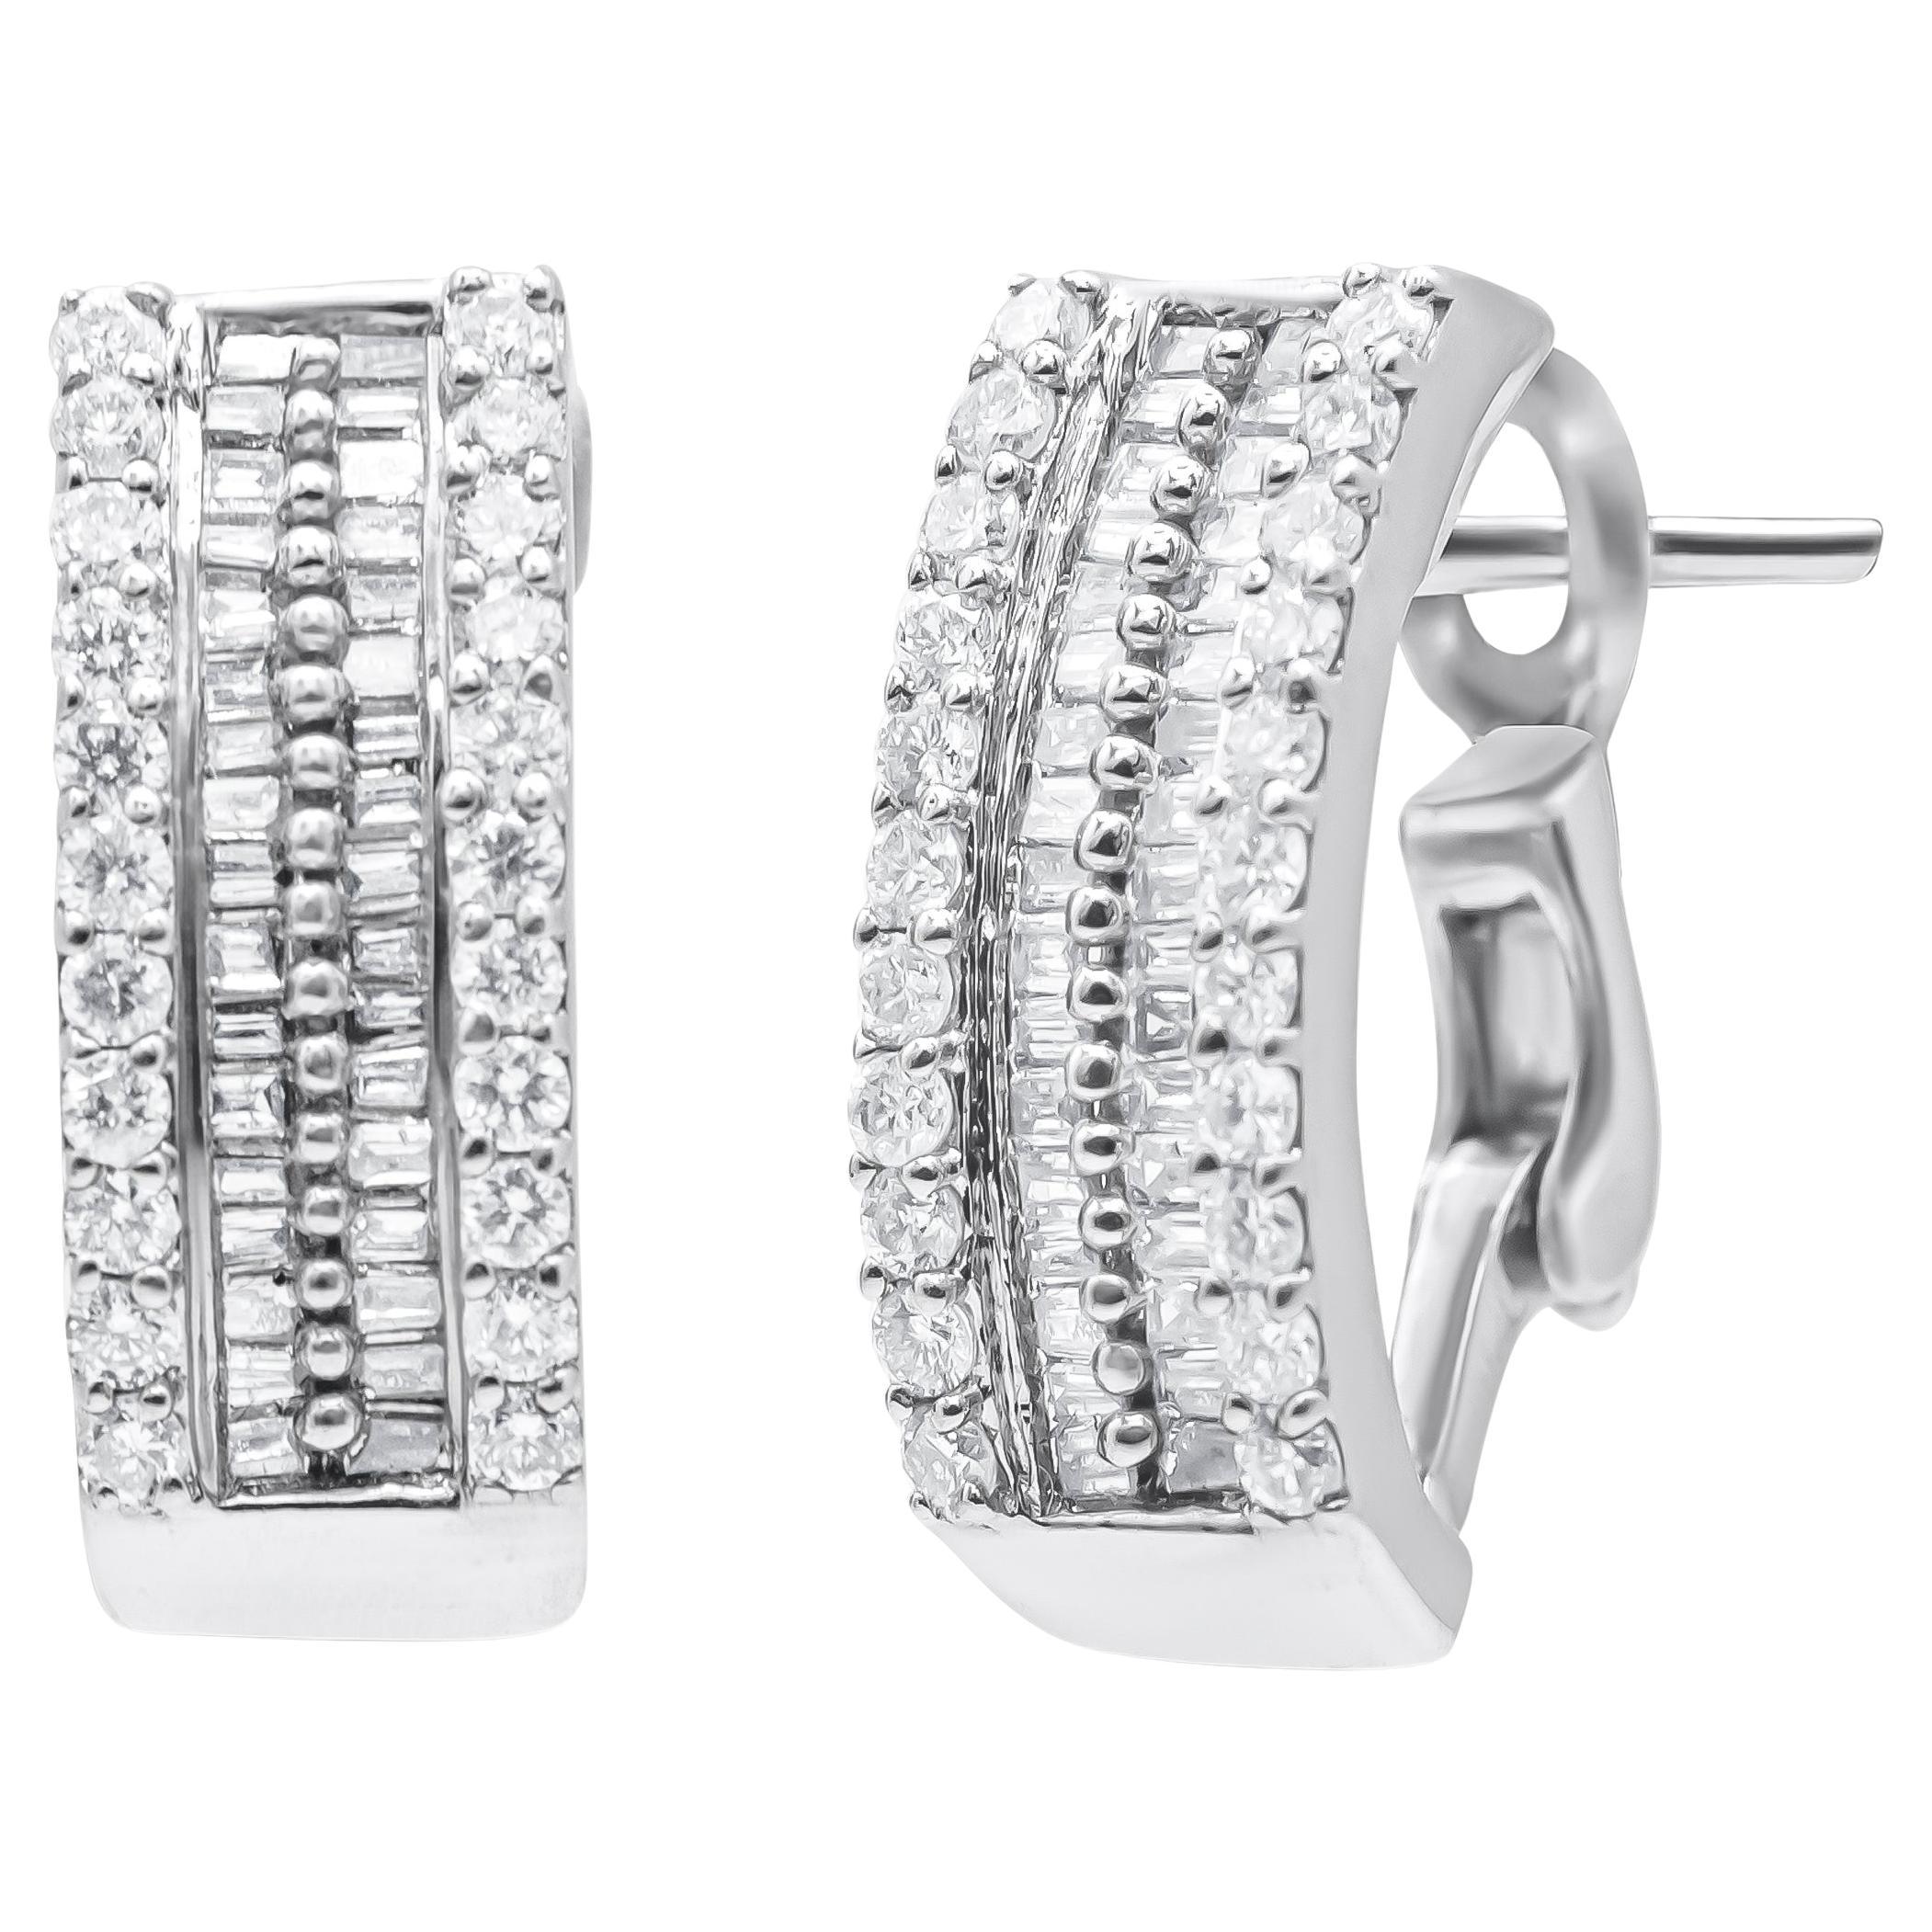 14K White Gold 1 1/2 Carat Round and Baguette Cut Diamond Hoop Earrings For Sale